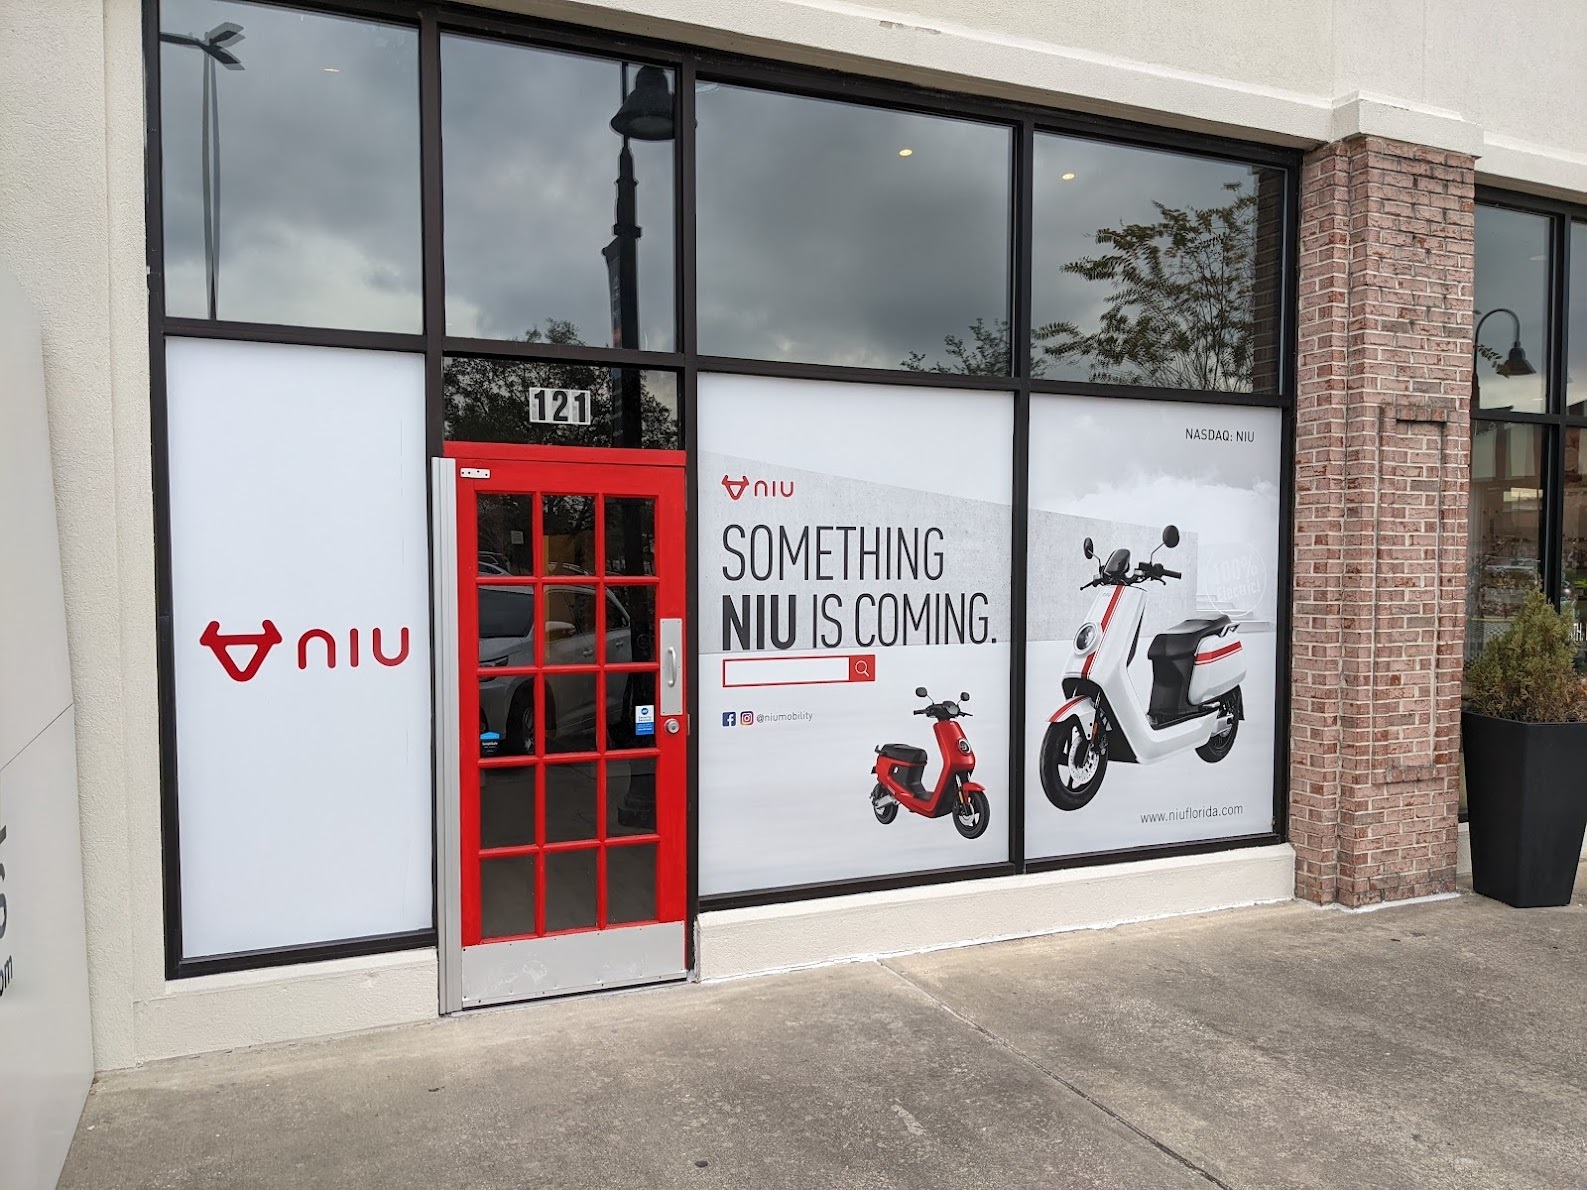 NIU Scooters is now open at 10281 Midtown Parkway, Suite 121.